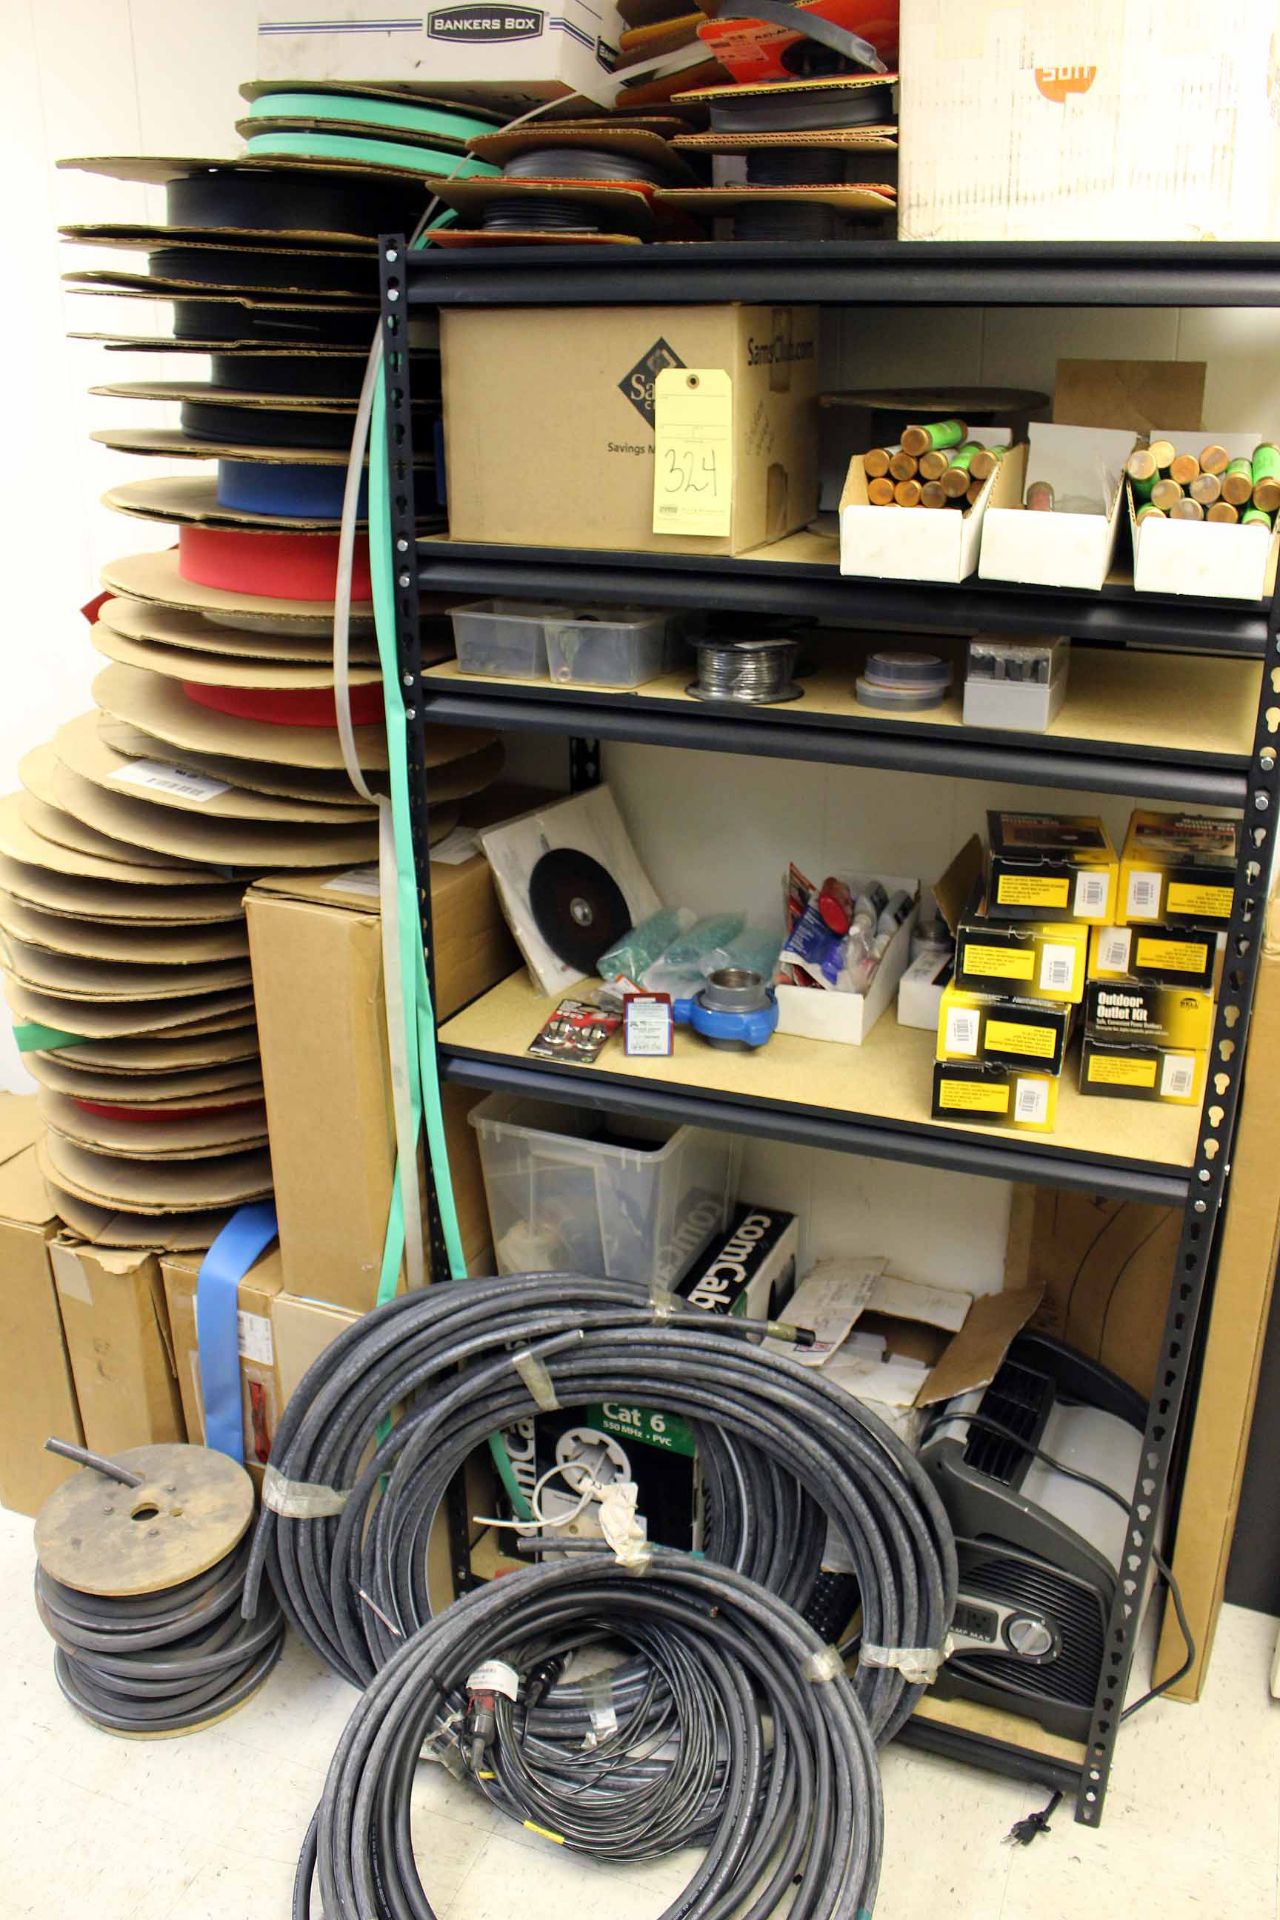 LOT CONSISTING OF ELECTRICAL SUPPLIES: plugs, wire, heat shrink tubing, etc.